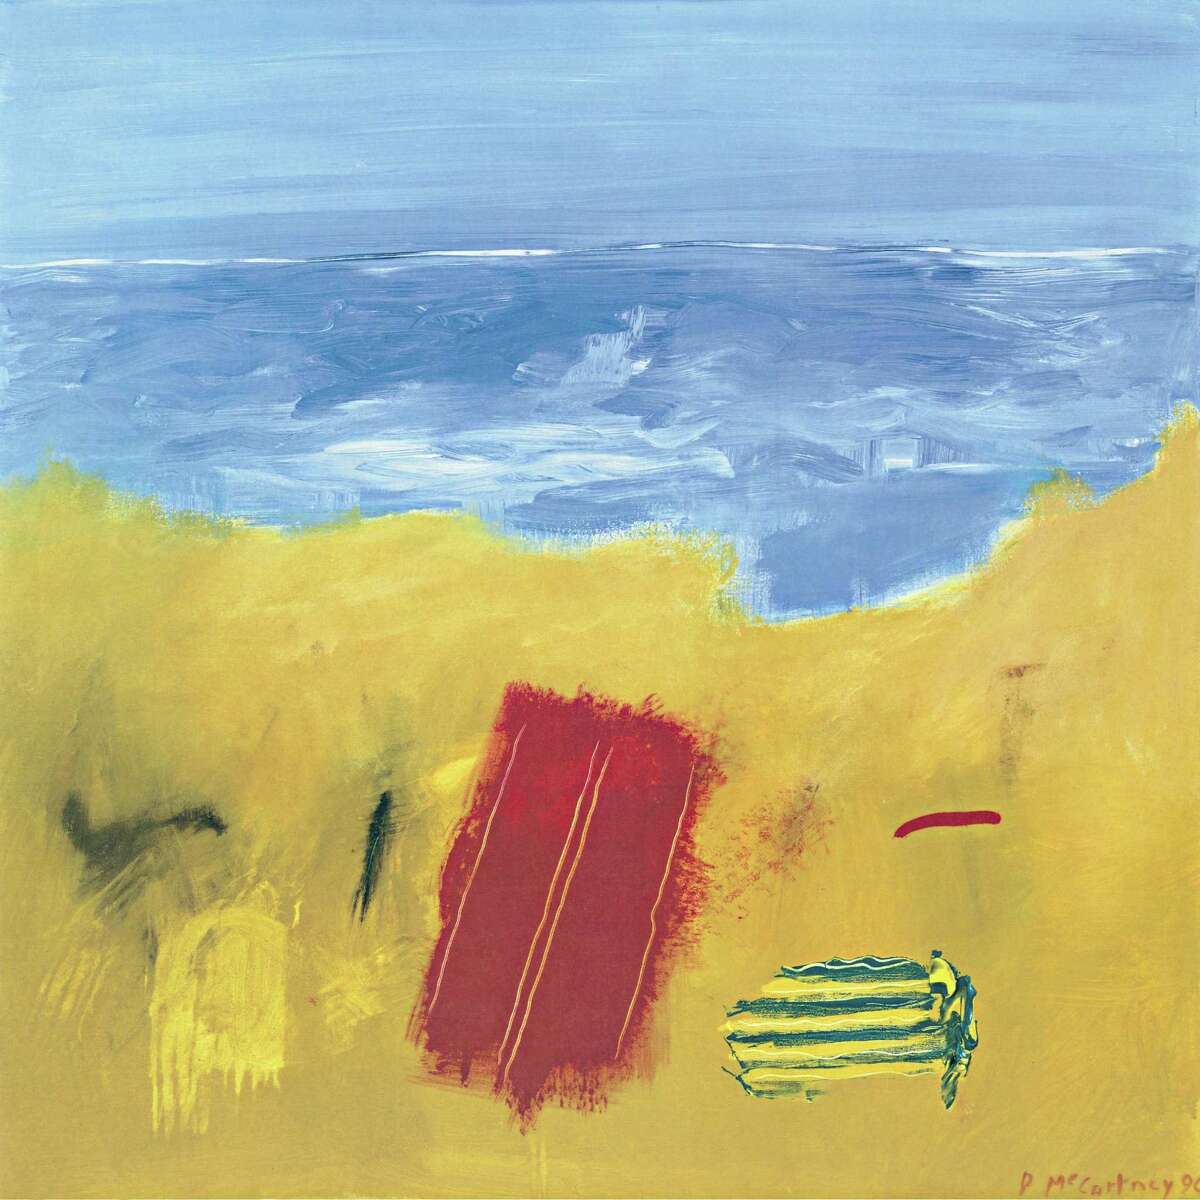 “Beach Towels,” by Paul McCartney, is featured in the Greenwich show at C. Parker Gallery Friday, Sept. 15, through Sunday, Sept. 24.